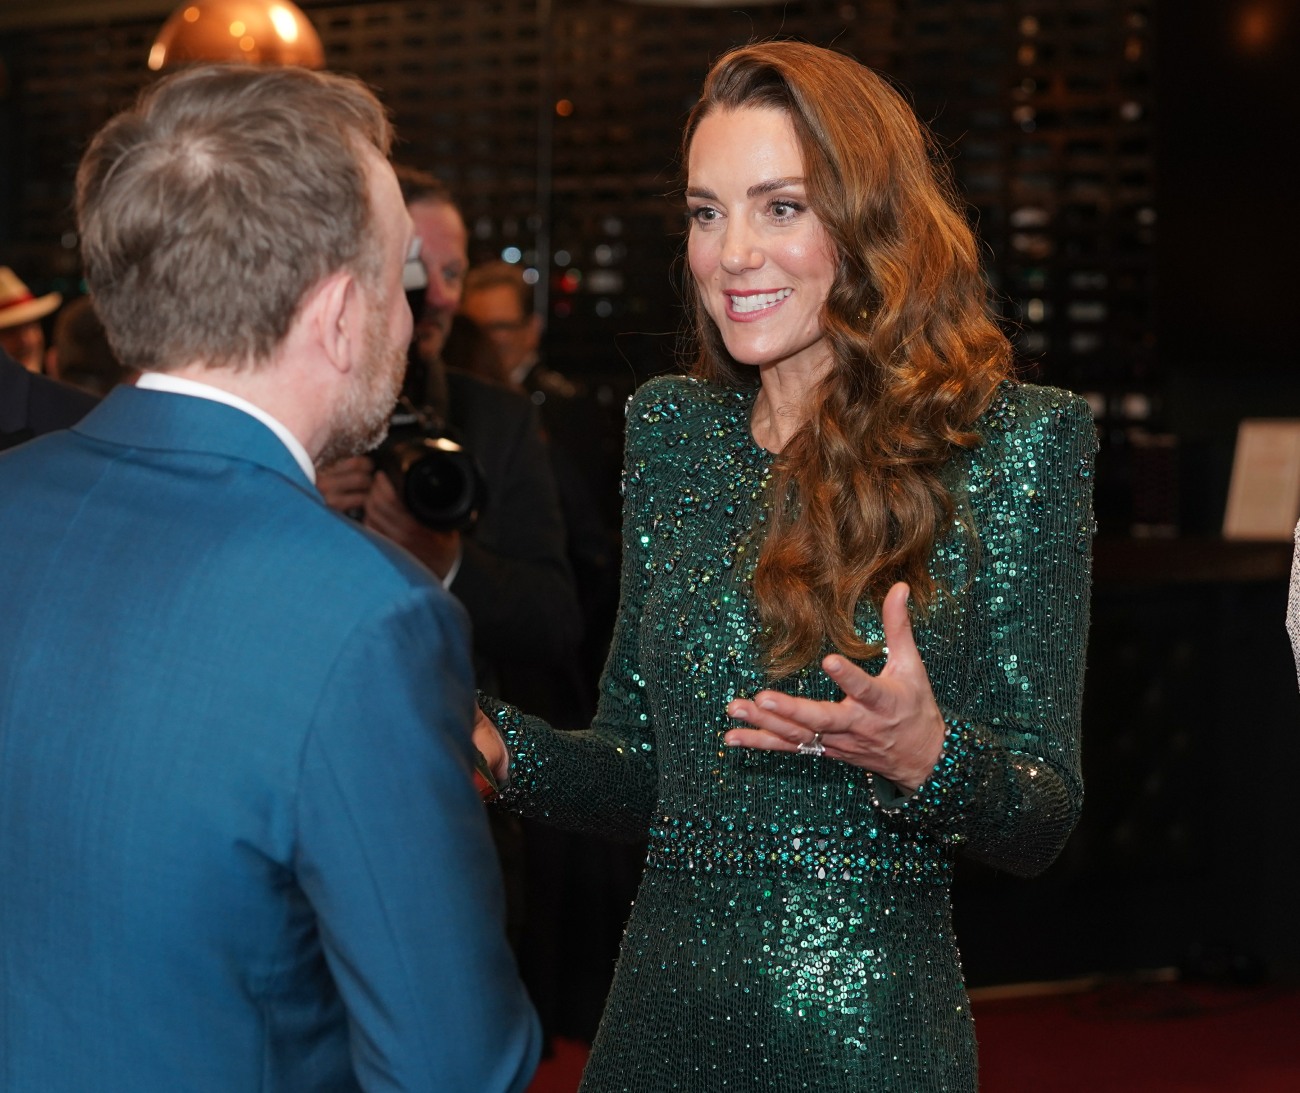 The Duke and the Duchess of Cambridge Attend the Royal Variety Performance